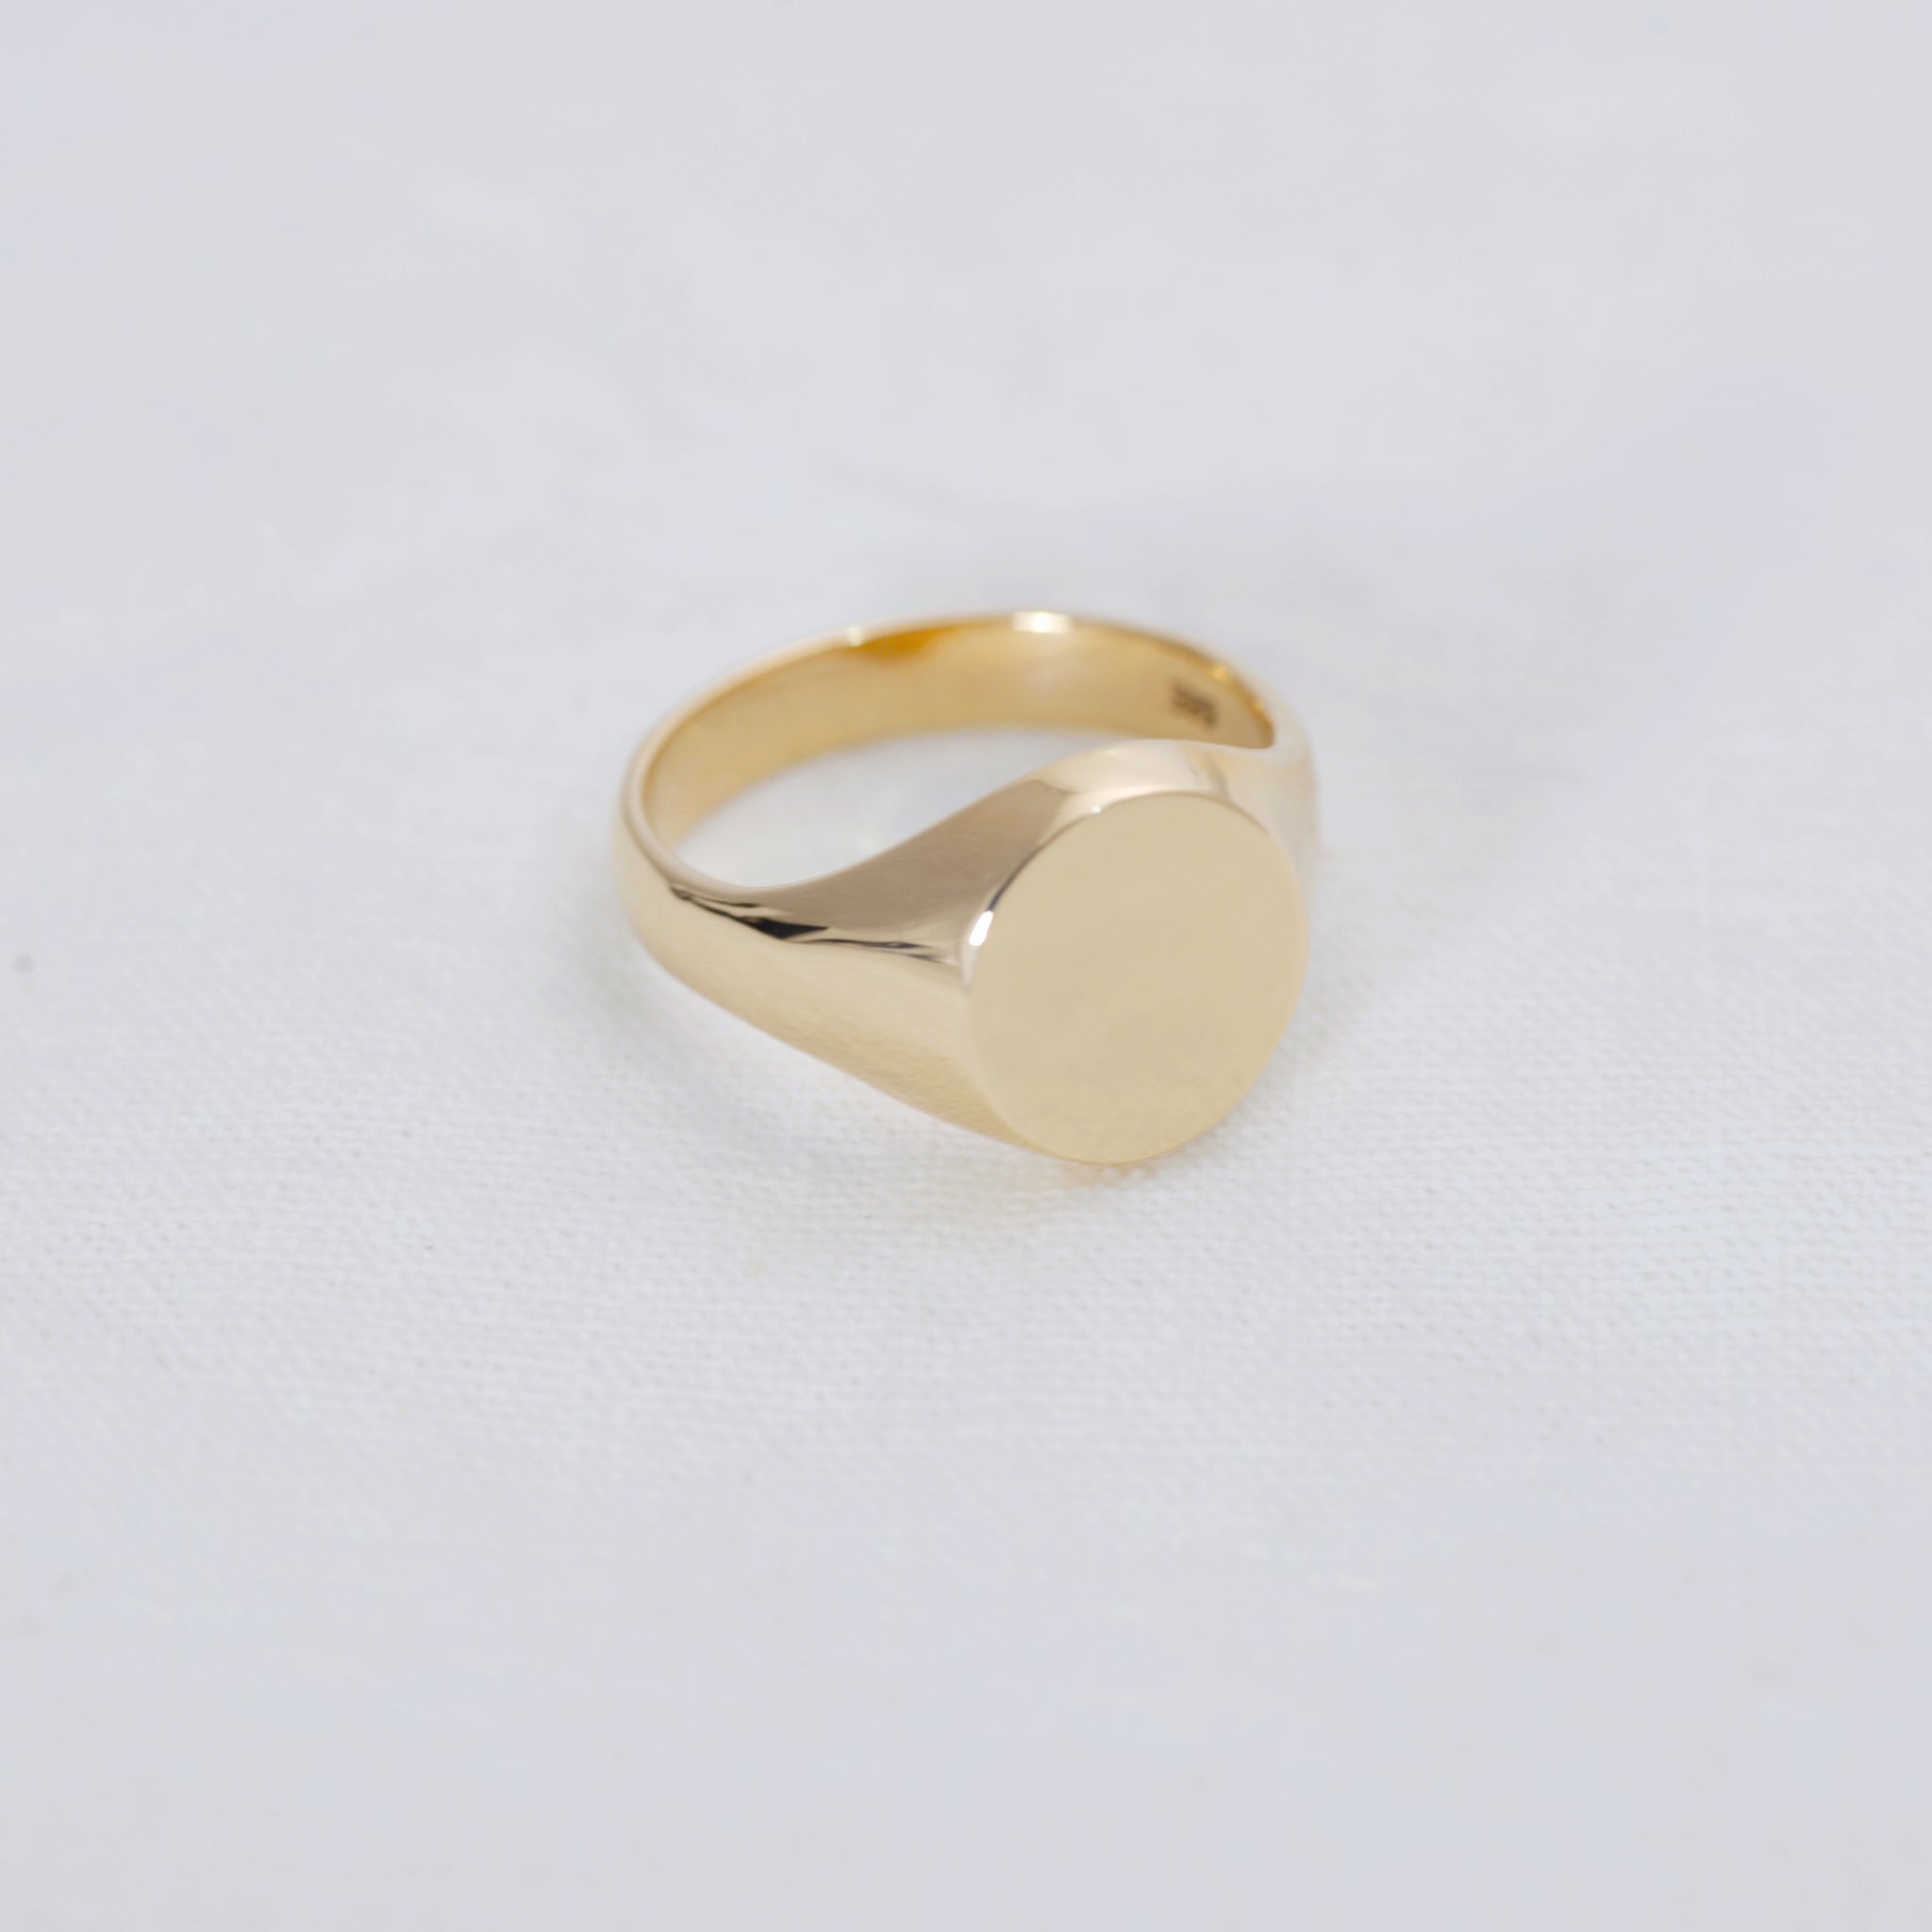 Oval signet Ring (small) - 14K/ 18K Gold